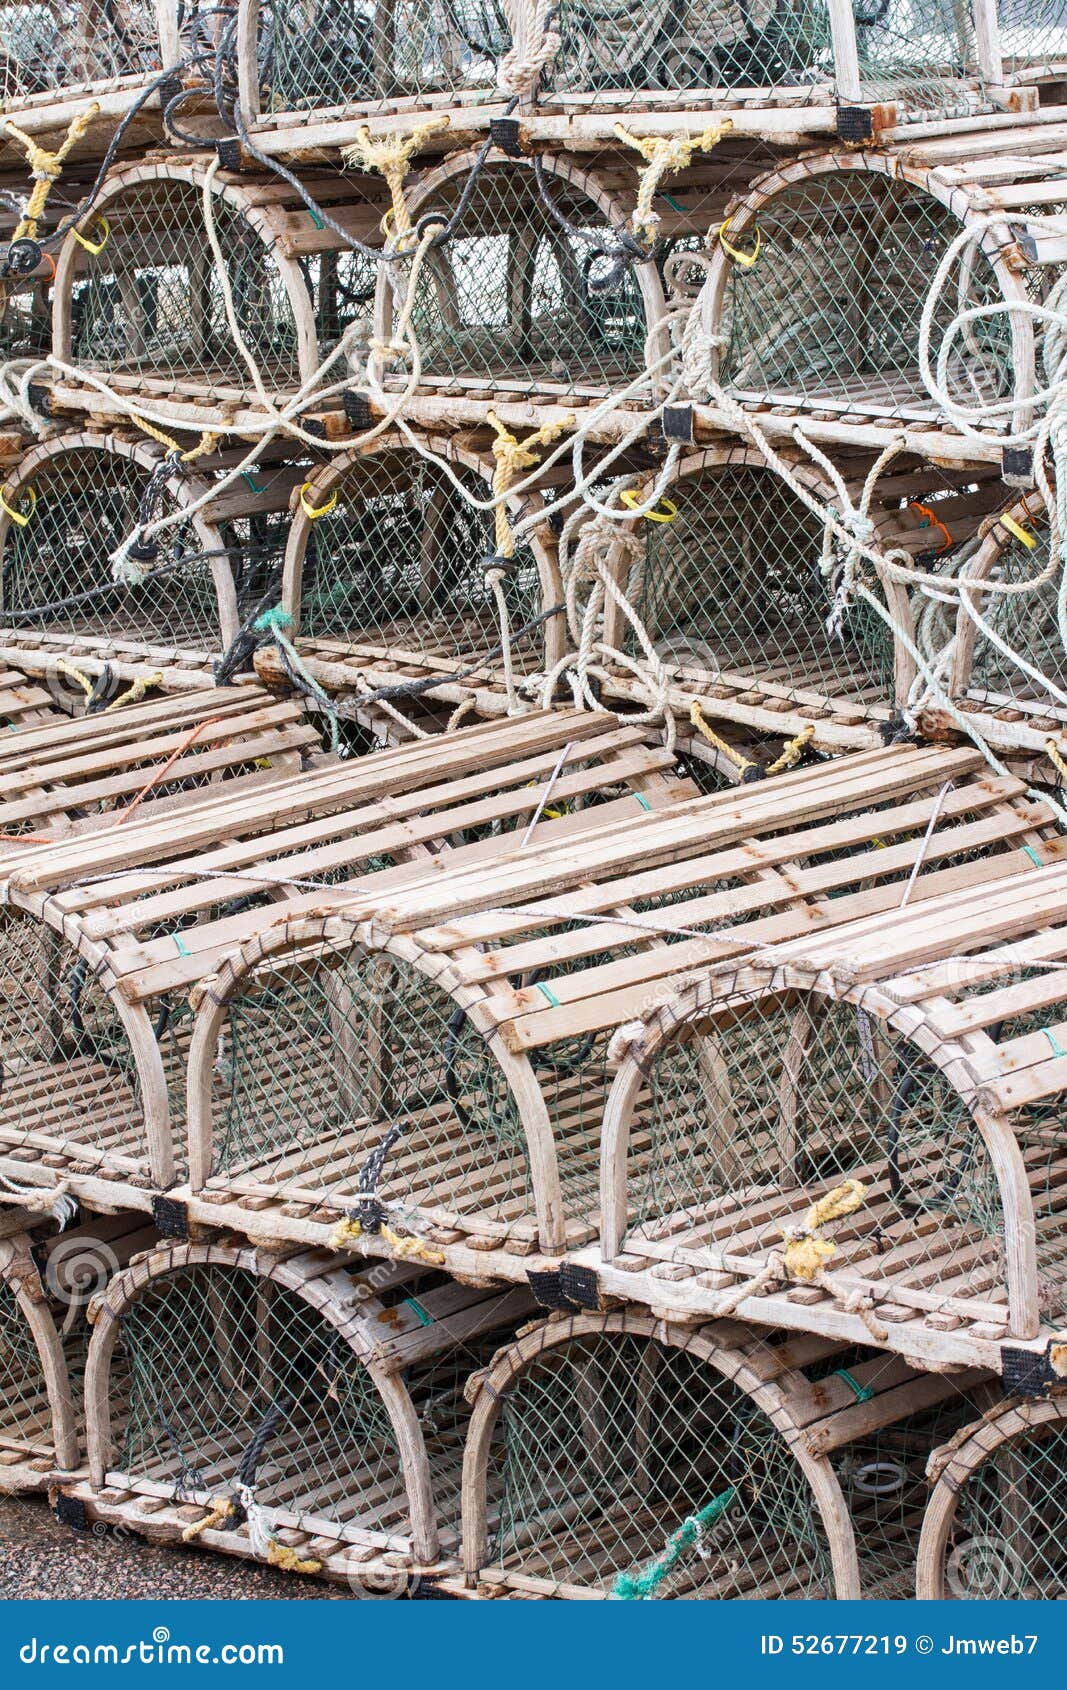 Lobster or Crab Traps stock image. Image of traps, marine - 52677219